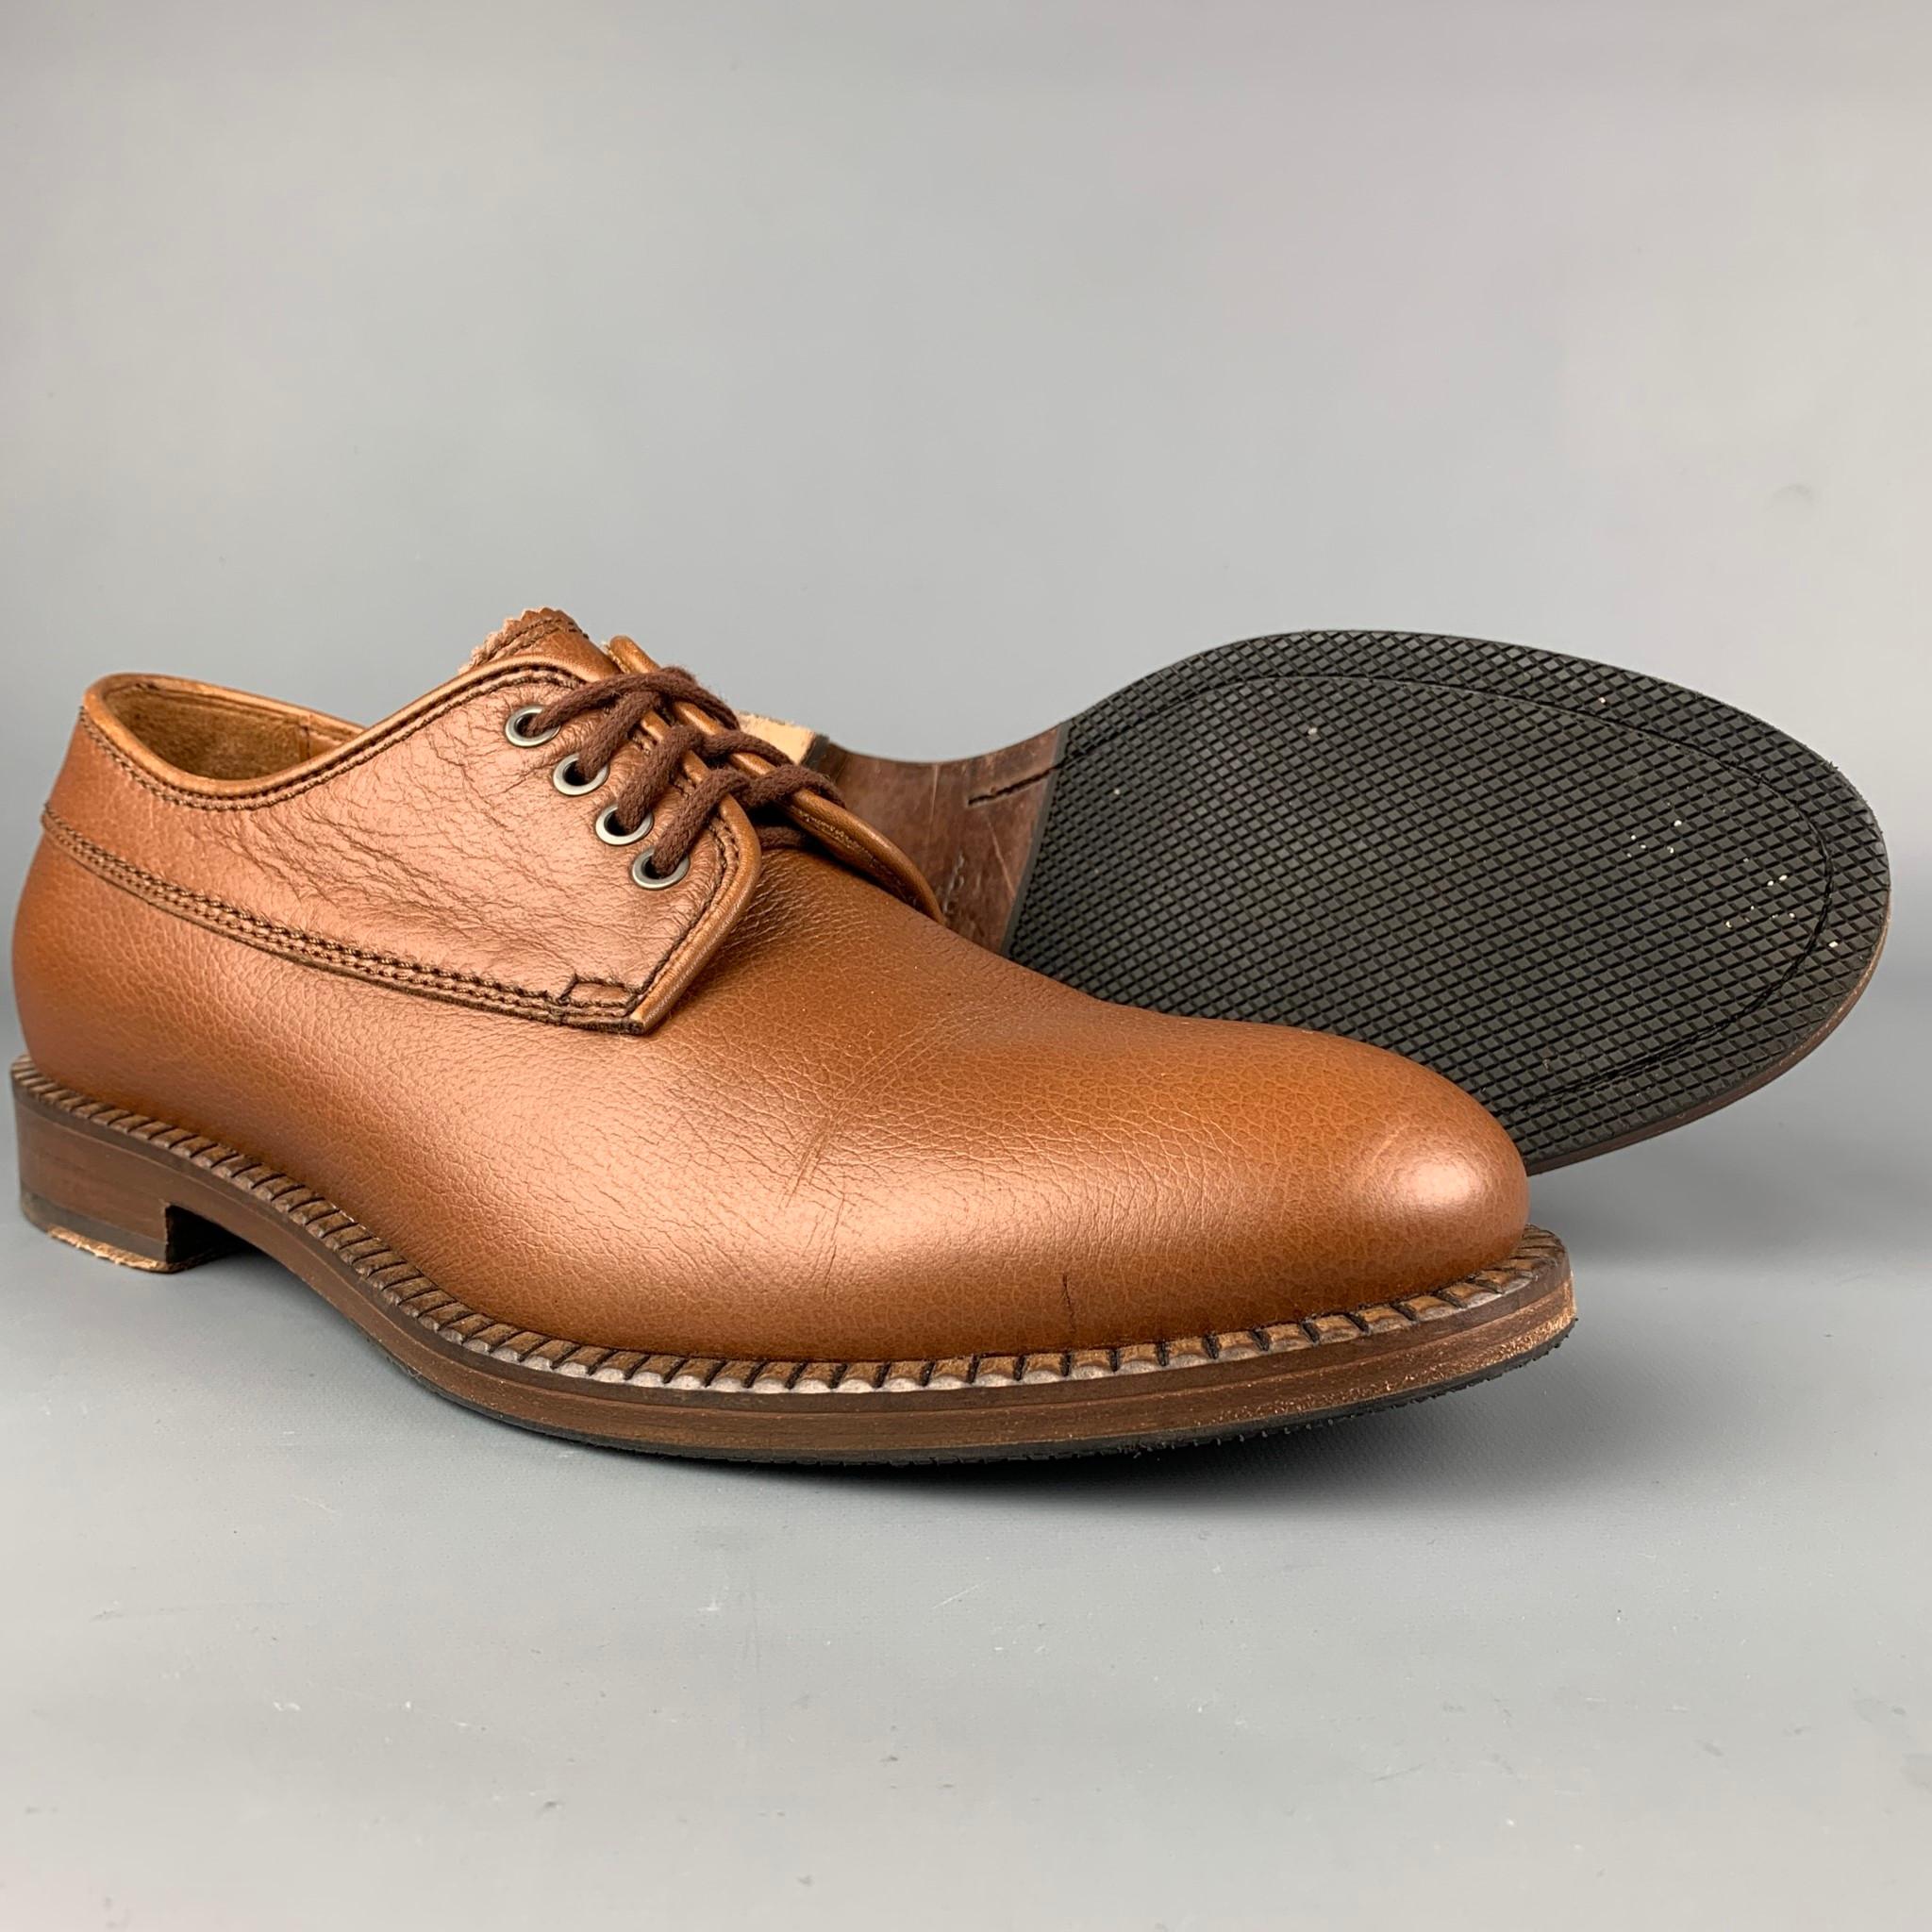 AQUATALIA shoes comes in a caramel leather featuring a cap toe, waterproof,  and a lace up closure. Made in Italy. 

Very Good Pre-Owned Condition.
Marked: 10.5 308719

Outsole: 12.5 in. x 4.5 in. 